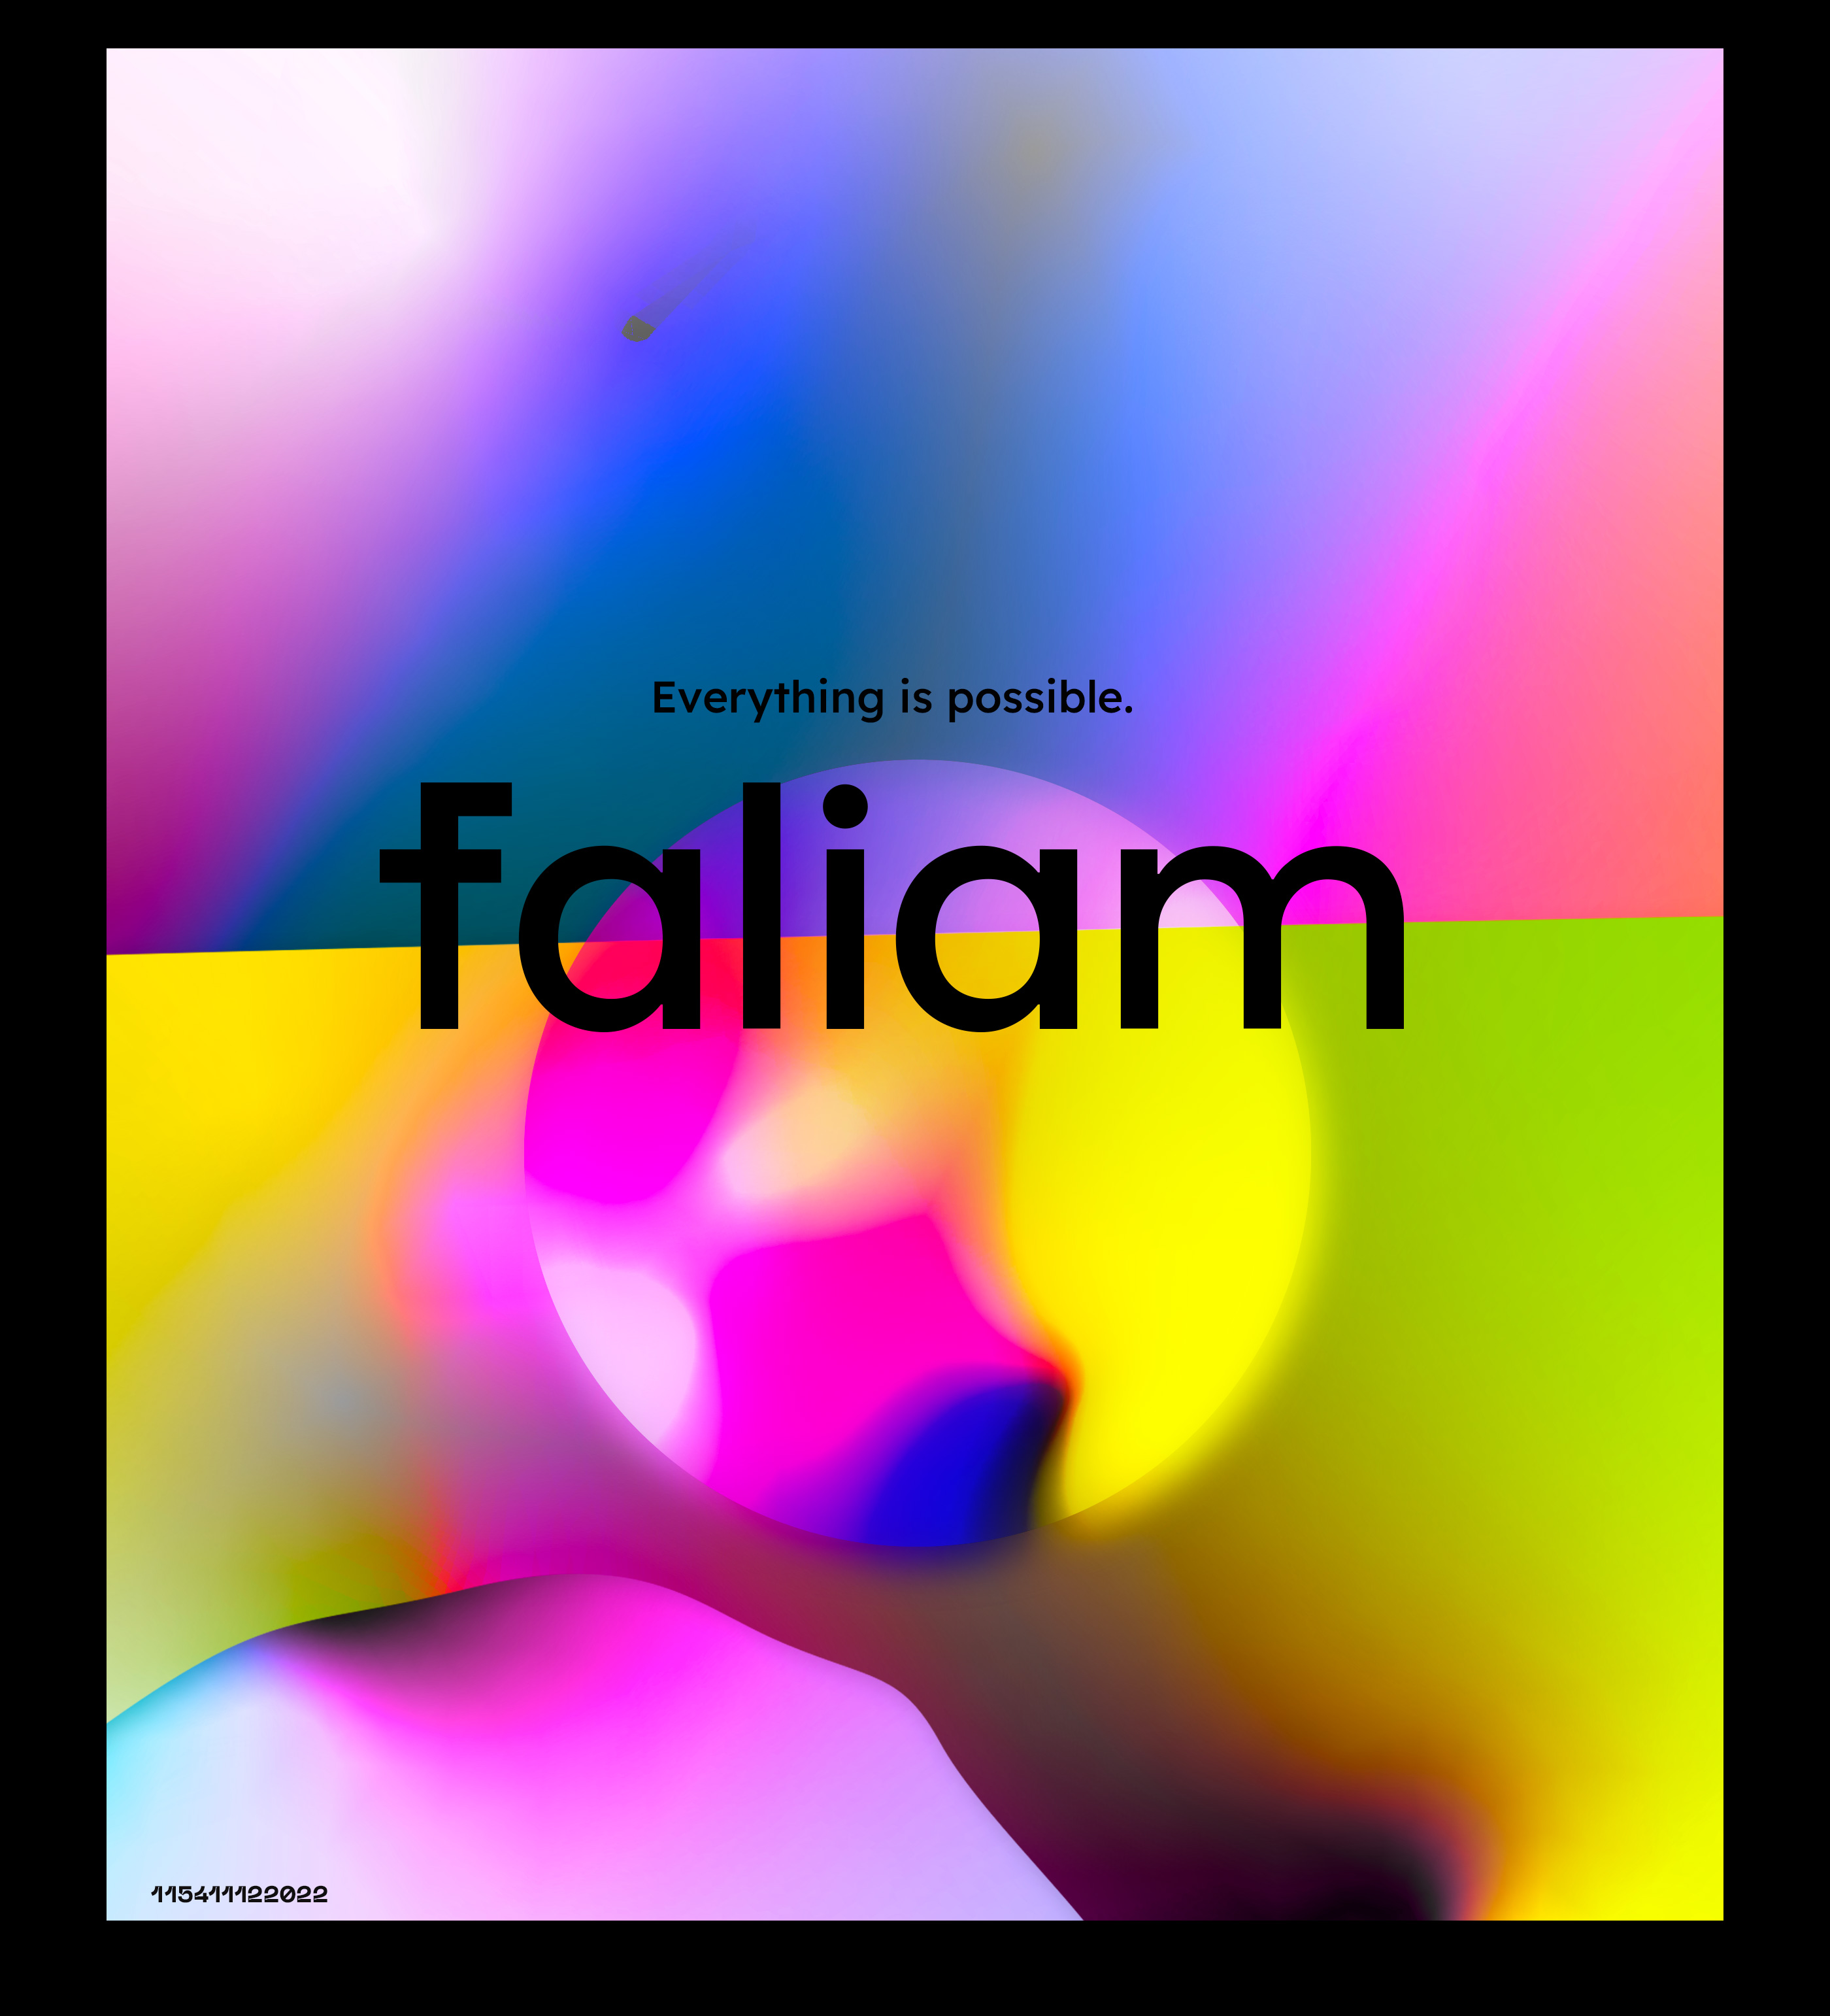 How do you make Faliam the face of design in the healthcare supply chain industry?